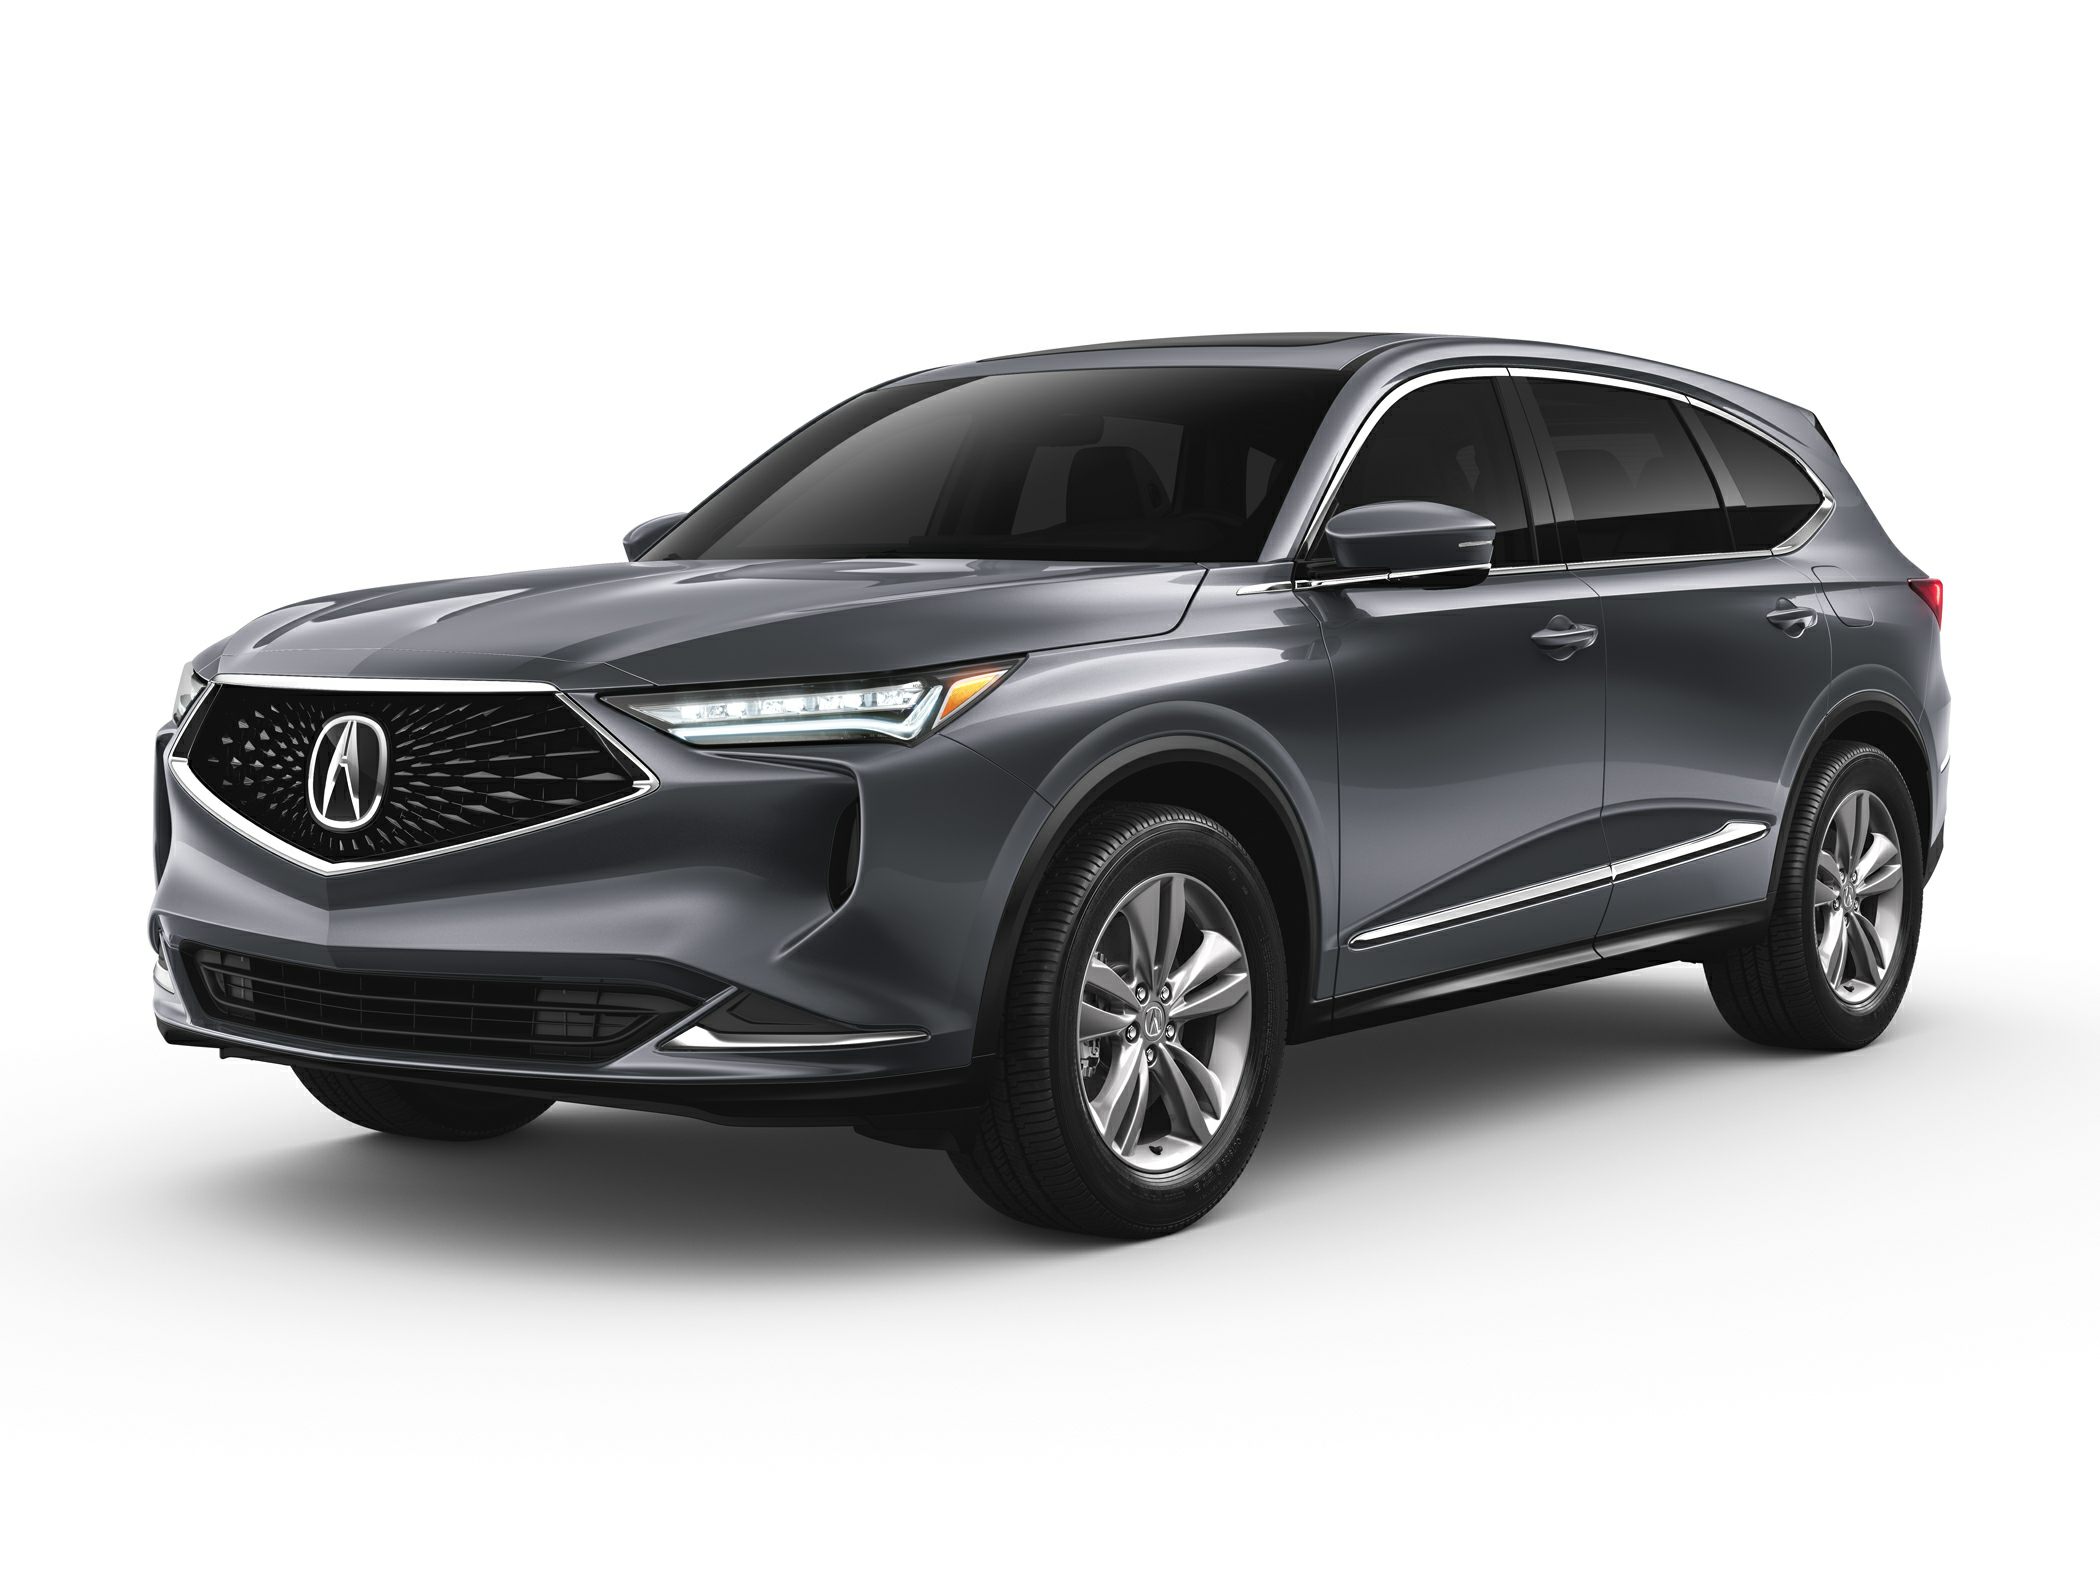 2022-acura-mdx-production-kicks-off-and-will-roll-into-dealers-soon